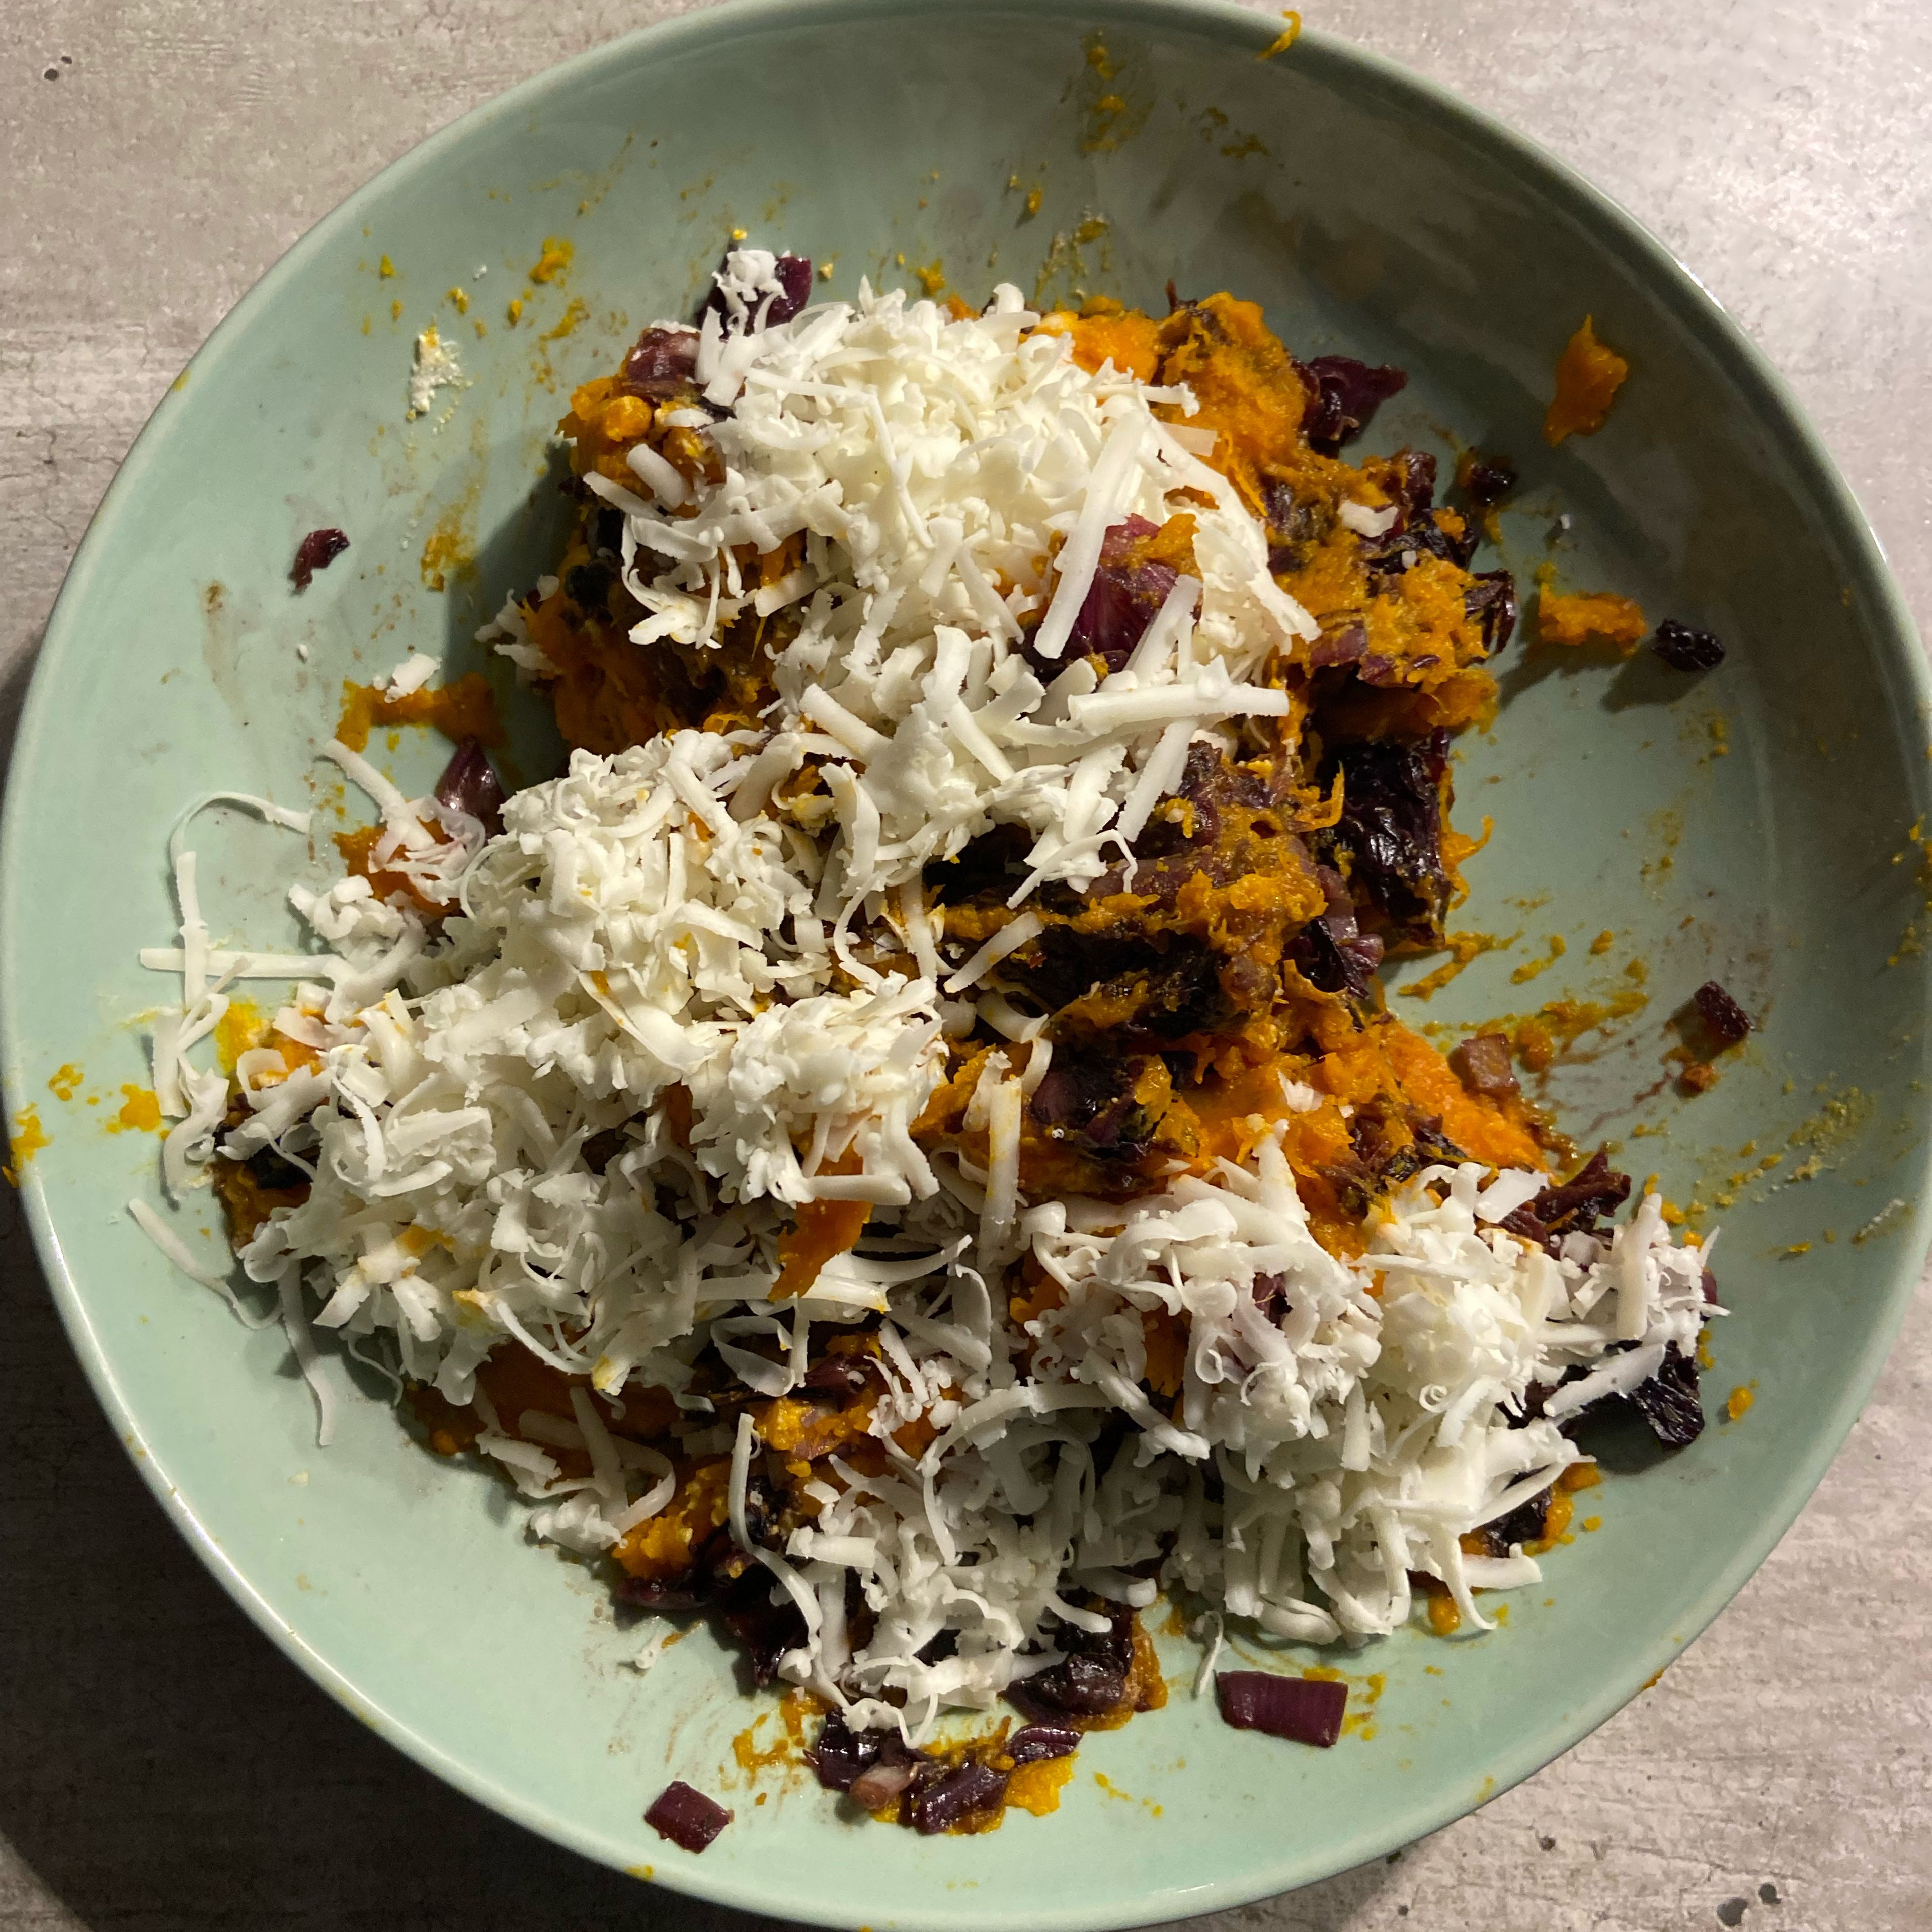 Add the smashed pumpkin, the cooked radicchio, walnuts, grated cheese and Parmesan to a bowl. Mix well all the ingredients with a spoon.